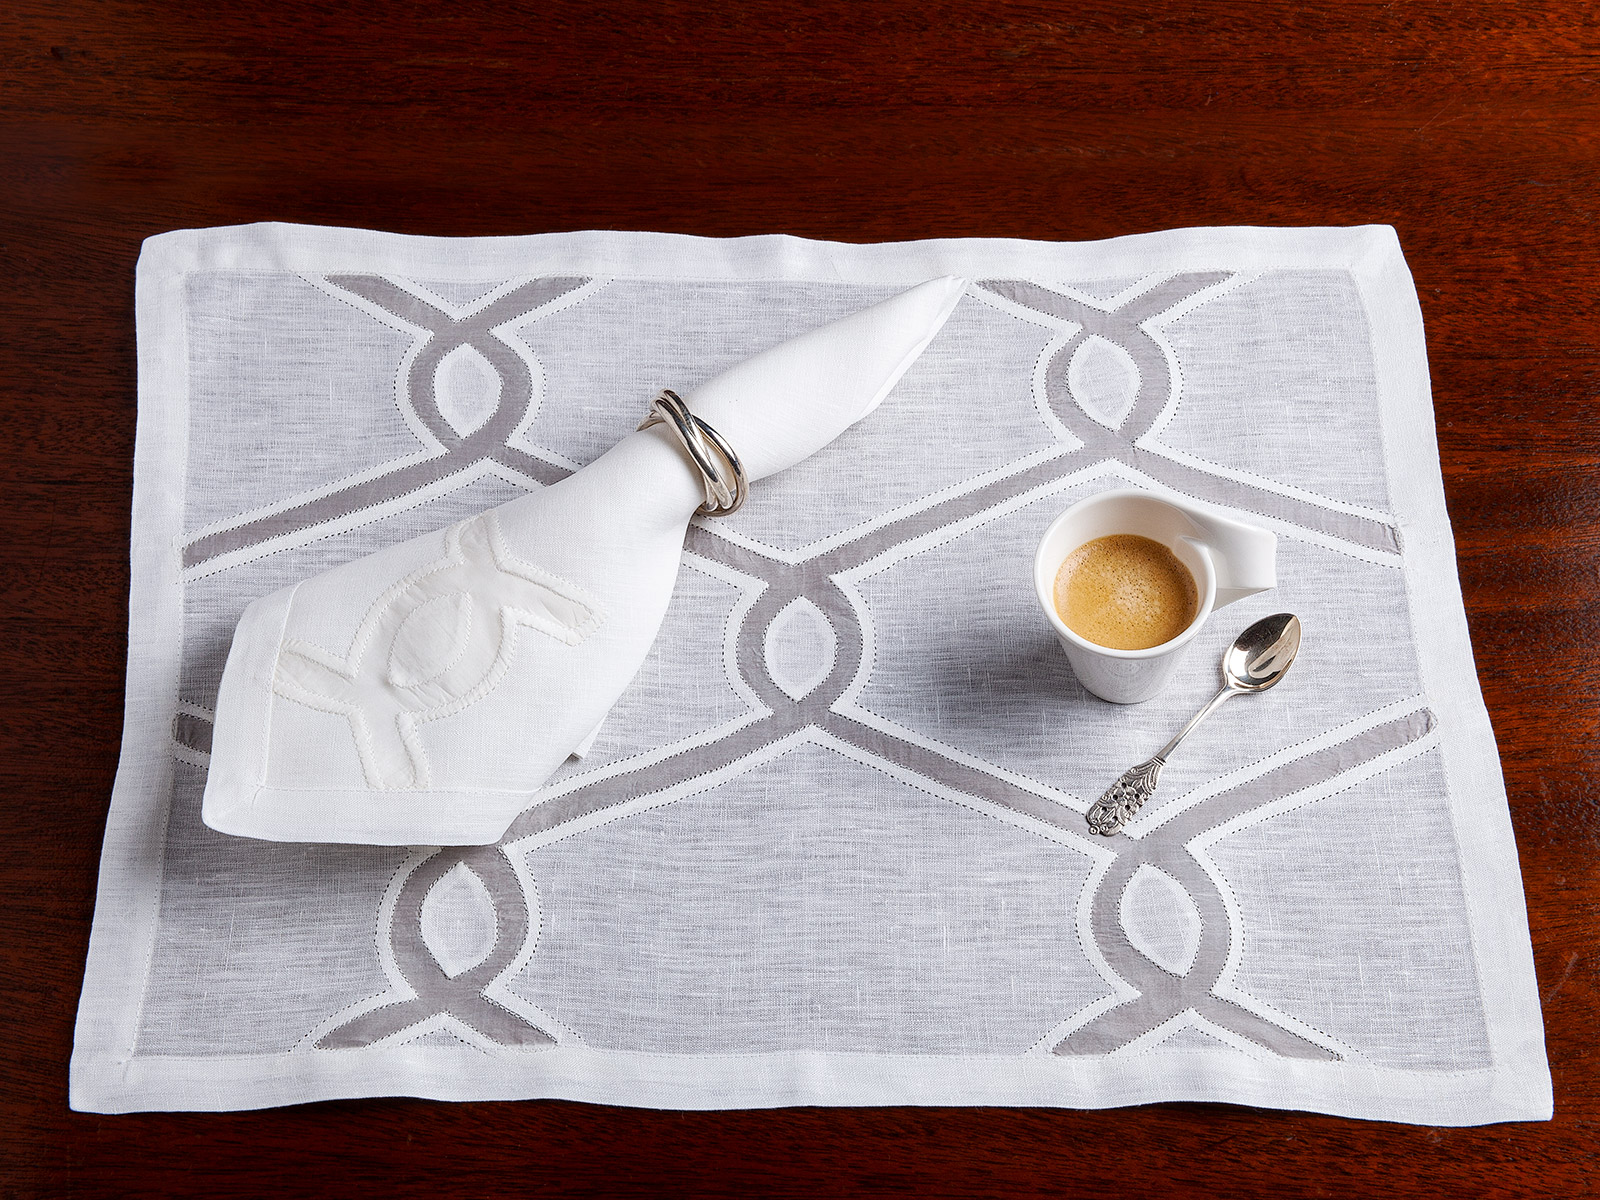 Image of a placemat